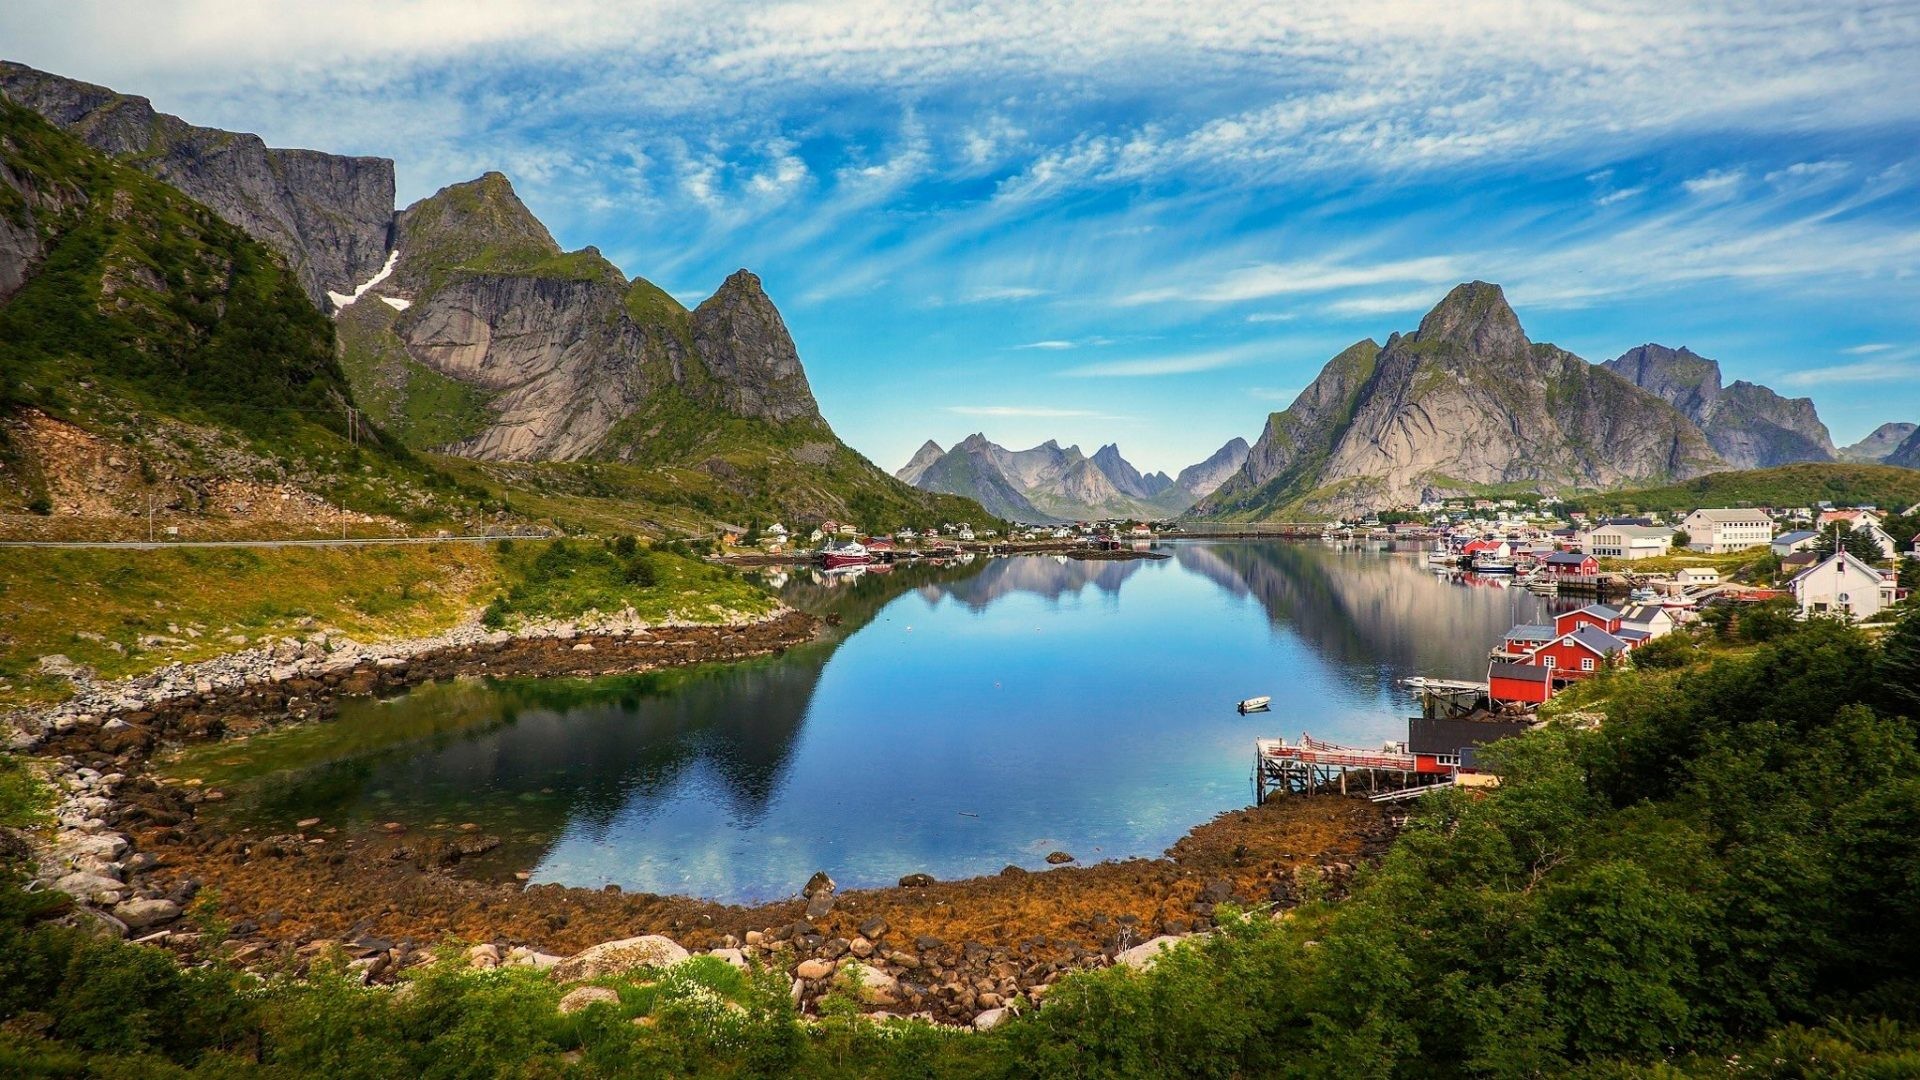 1920x1080 ... Nature Wallpapers Iphone 6. 2048x1152. Norway Tag - Shrubs Norway Water  Road Beautiful Summer Mountains Grass Town Fjord Clouds Dock Android